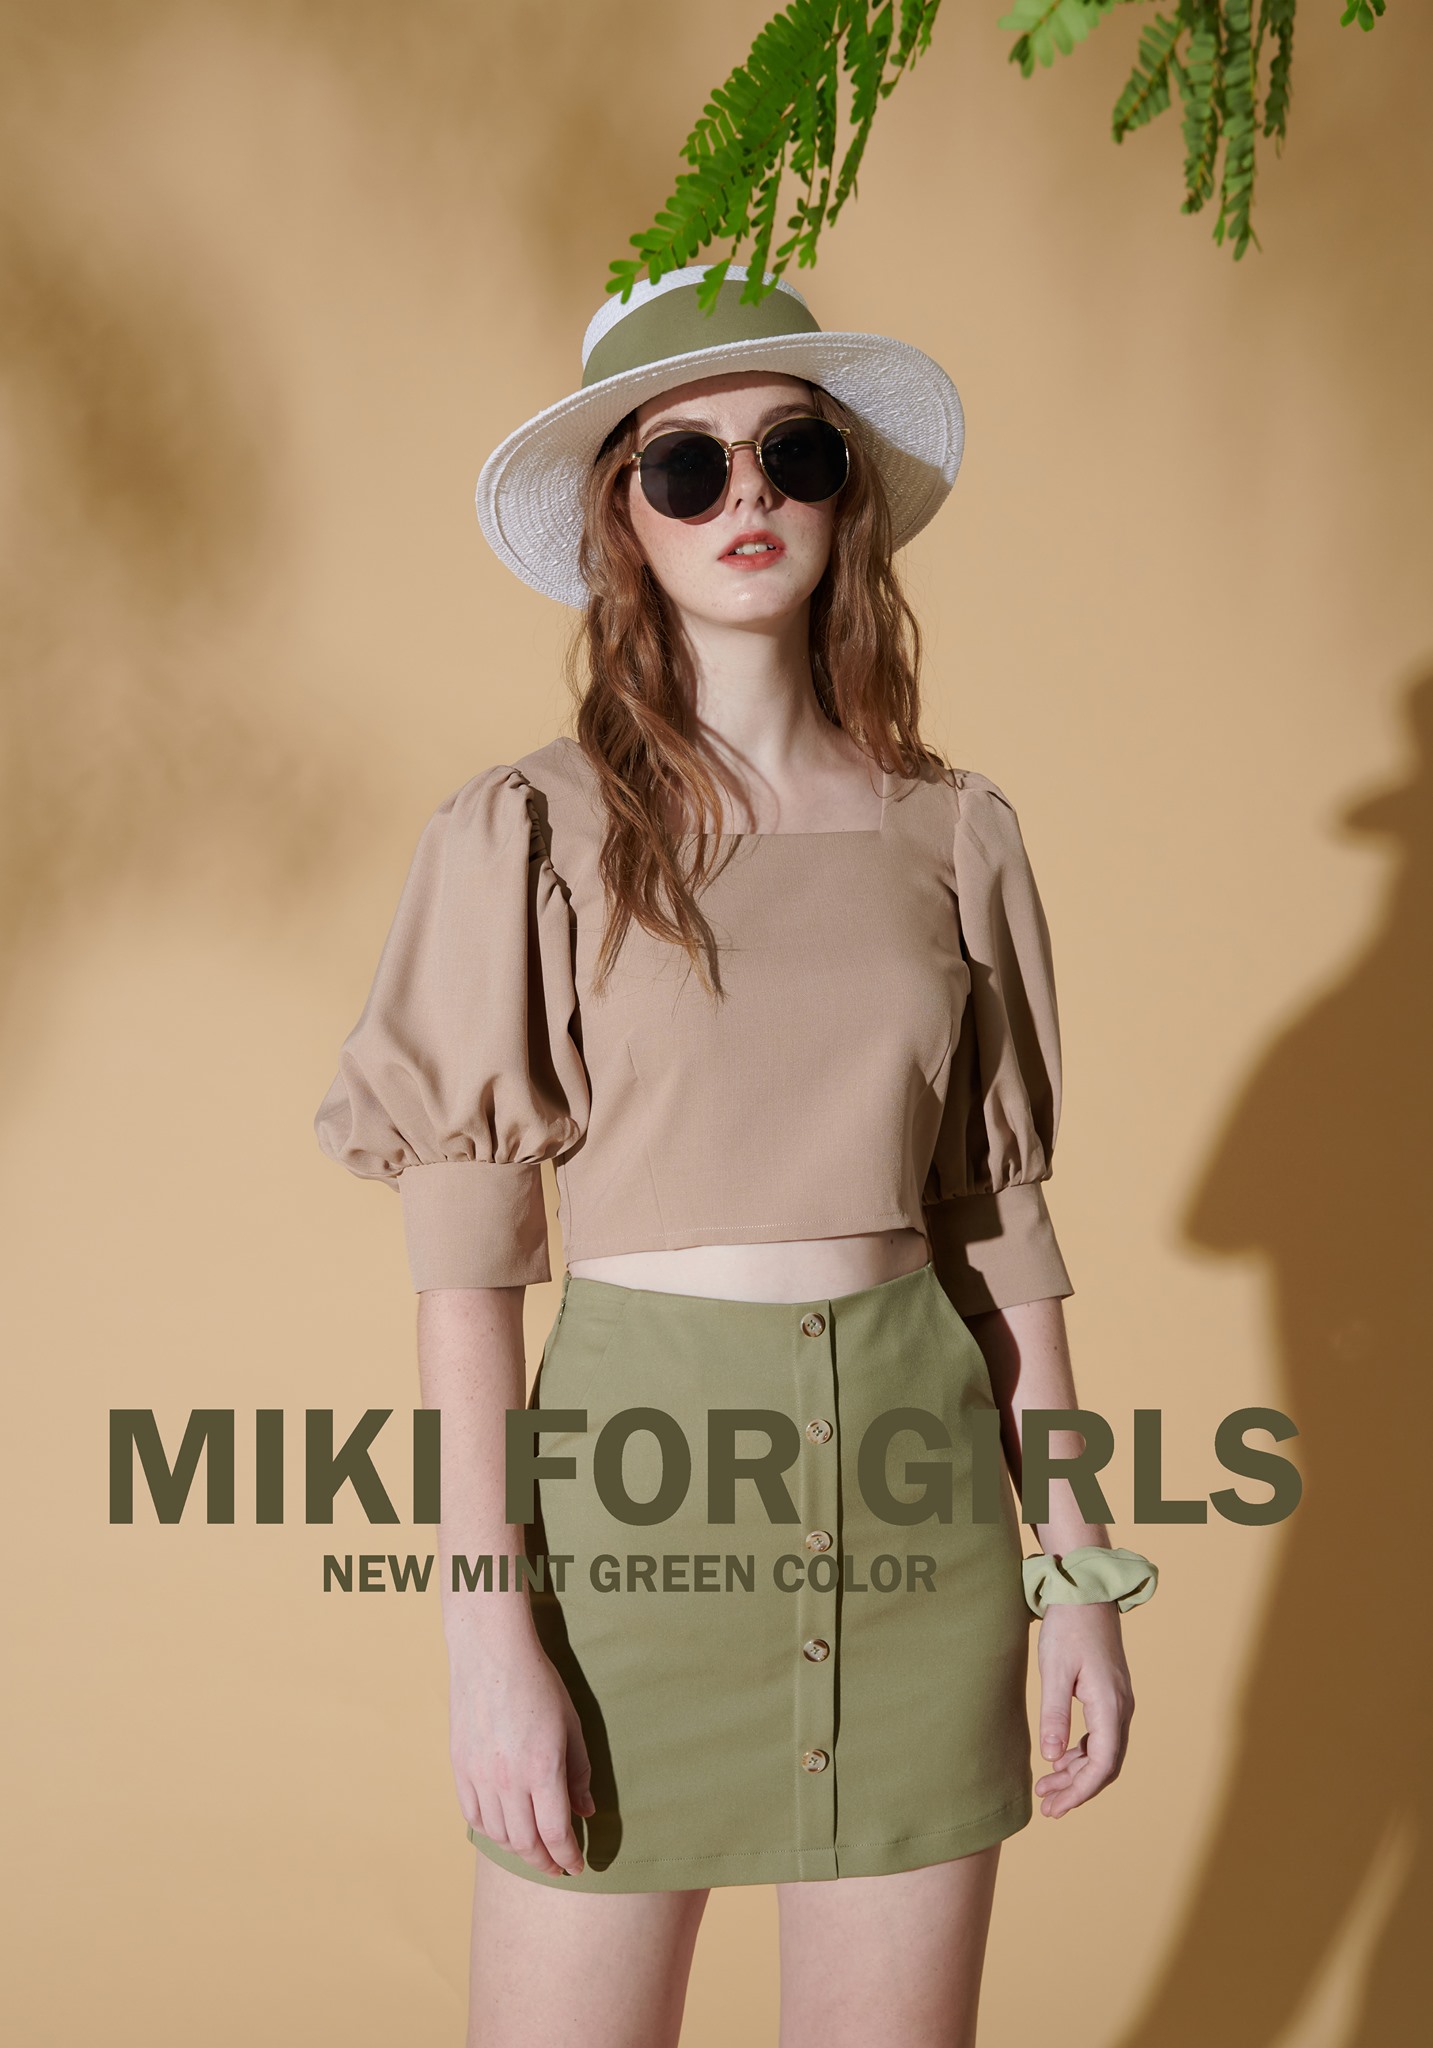 MIKI FOR GIRLS – MINT GREEN COLOR